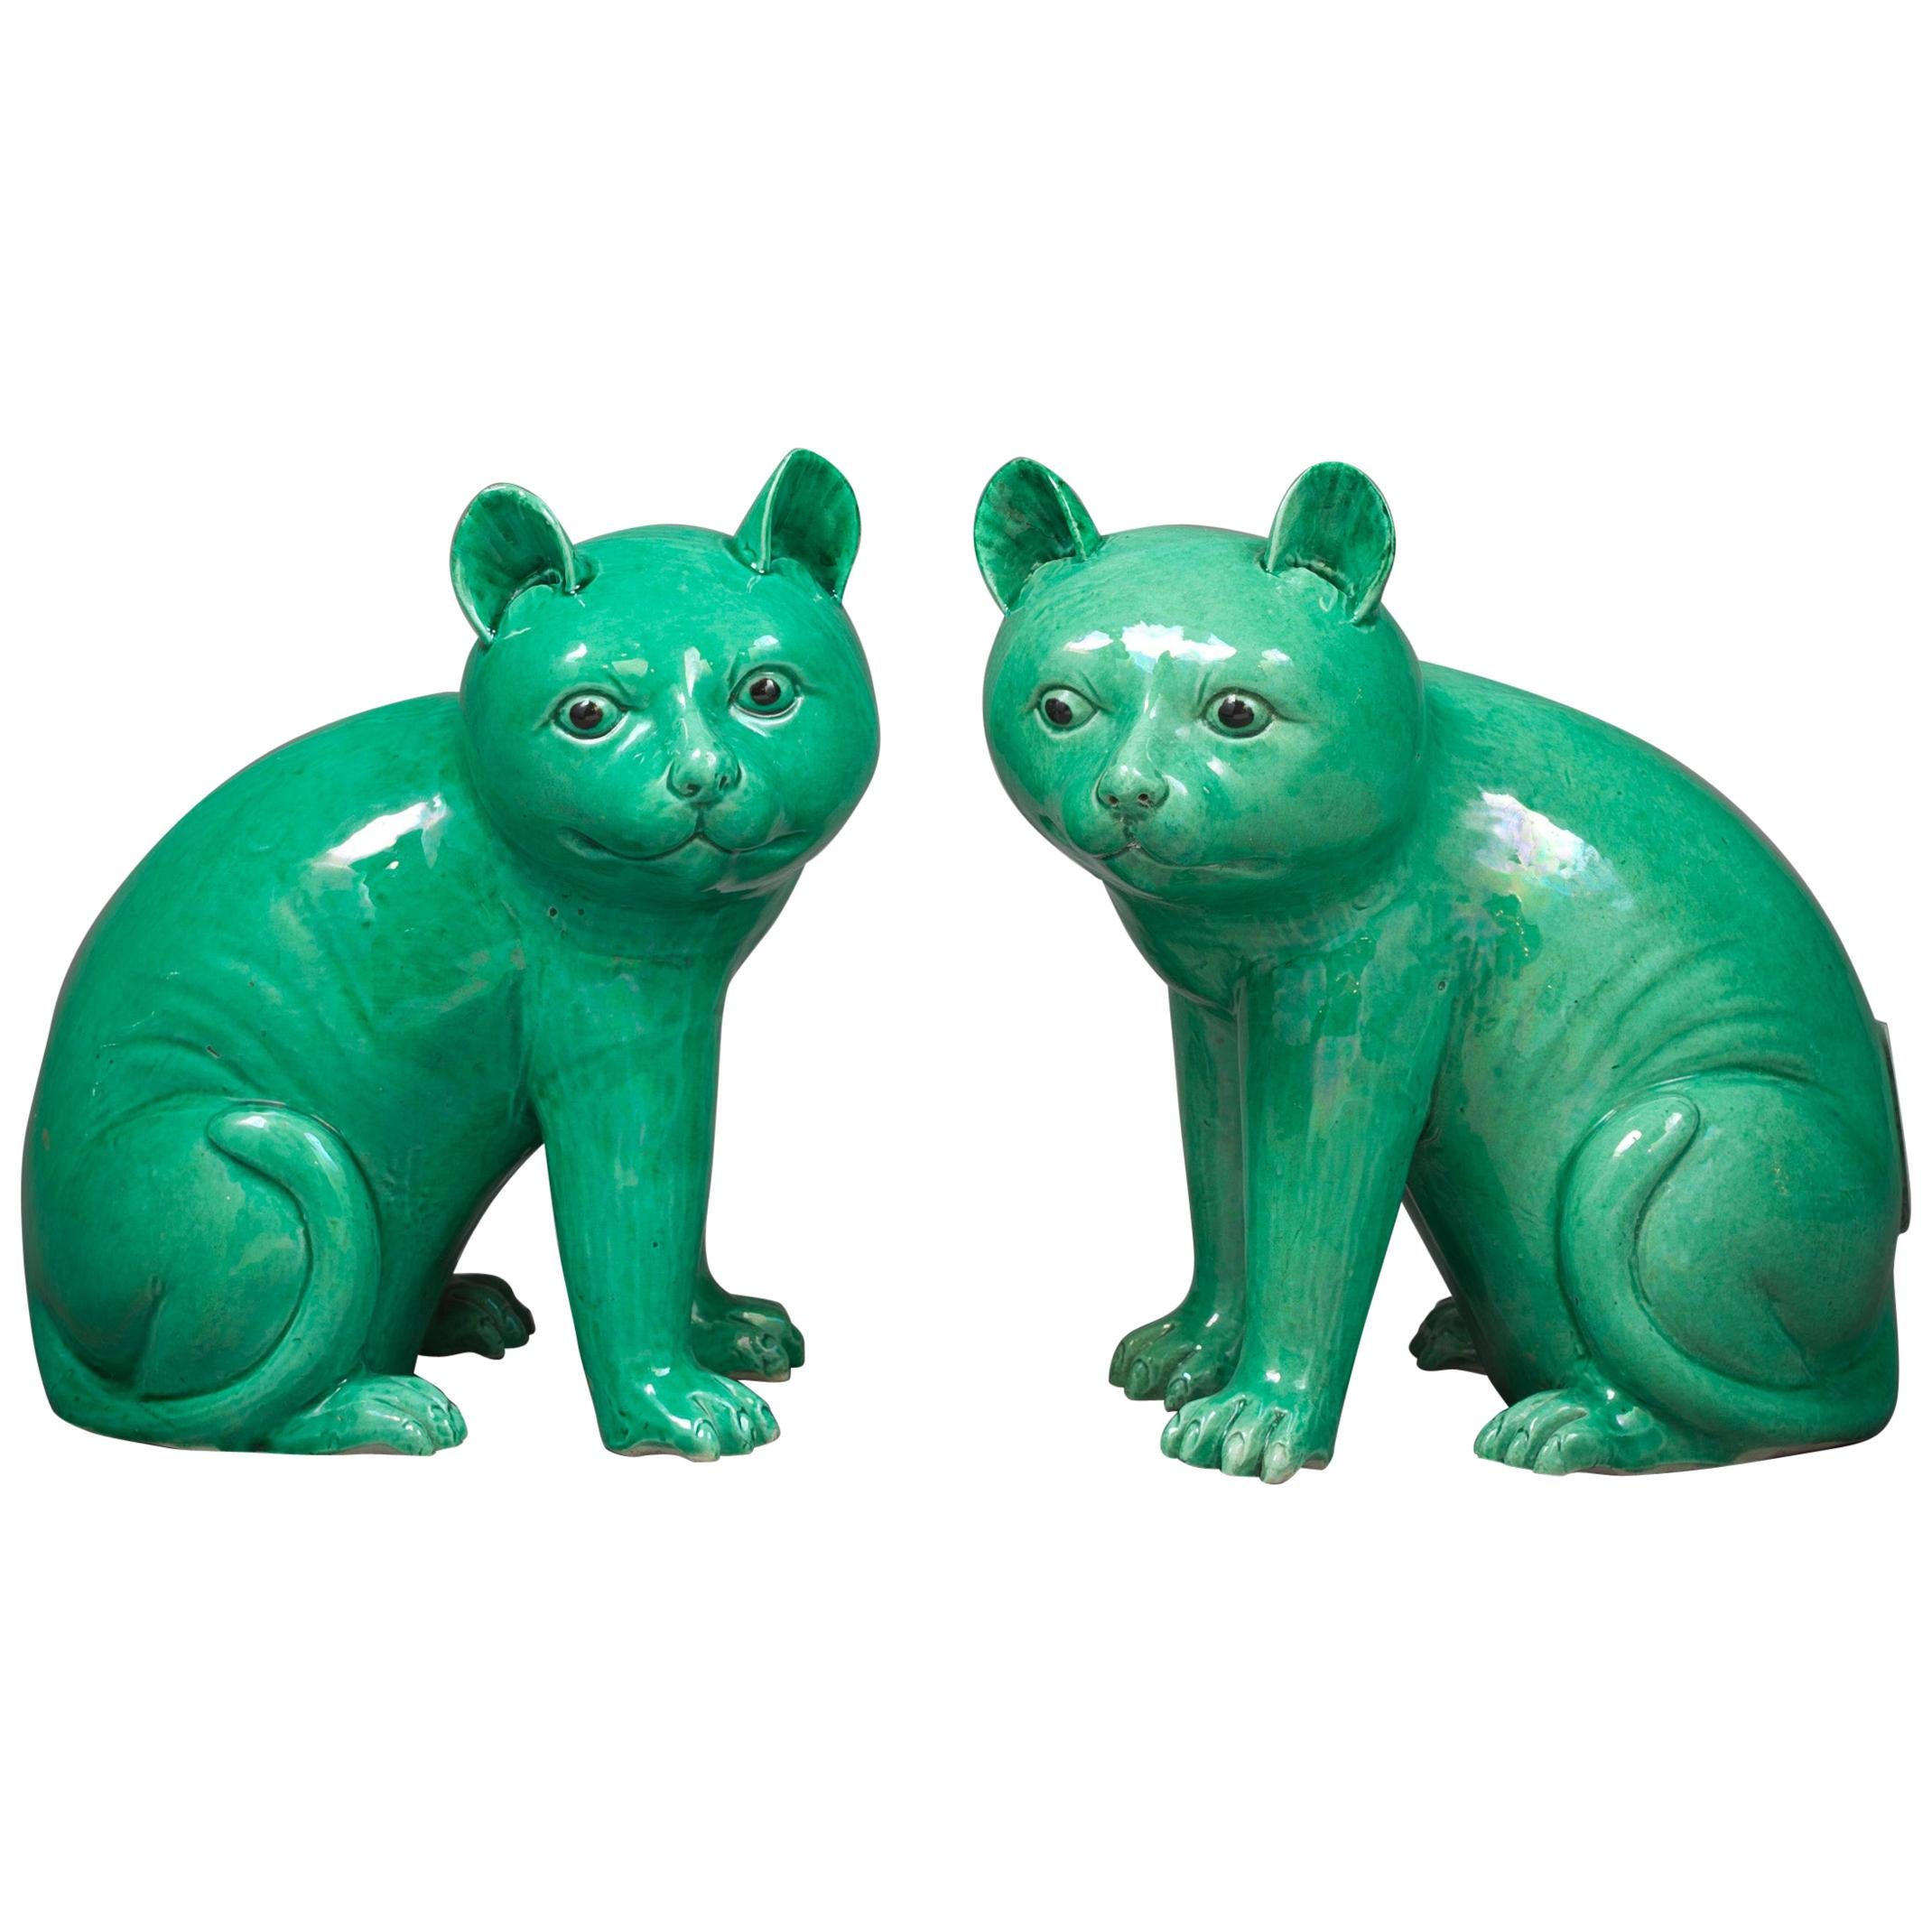 Pair of Chinese Porcelain Cats, circa 1750